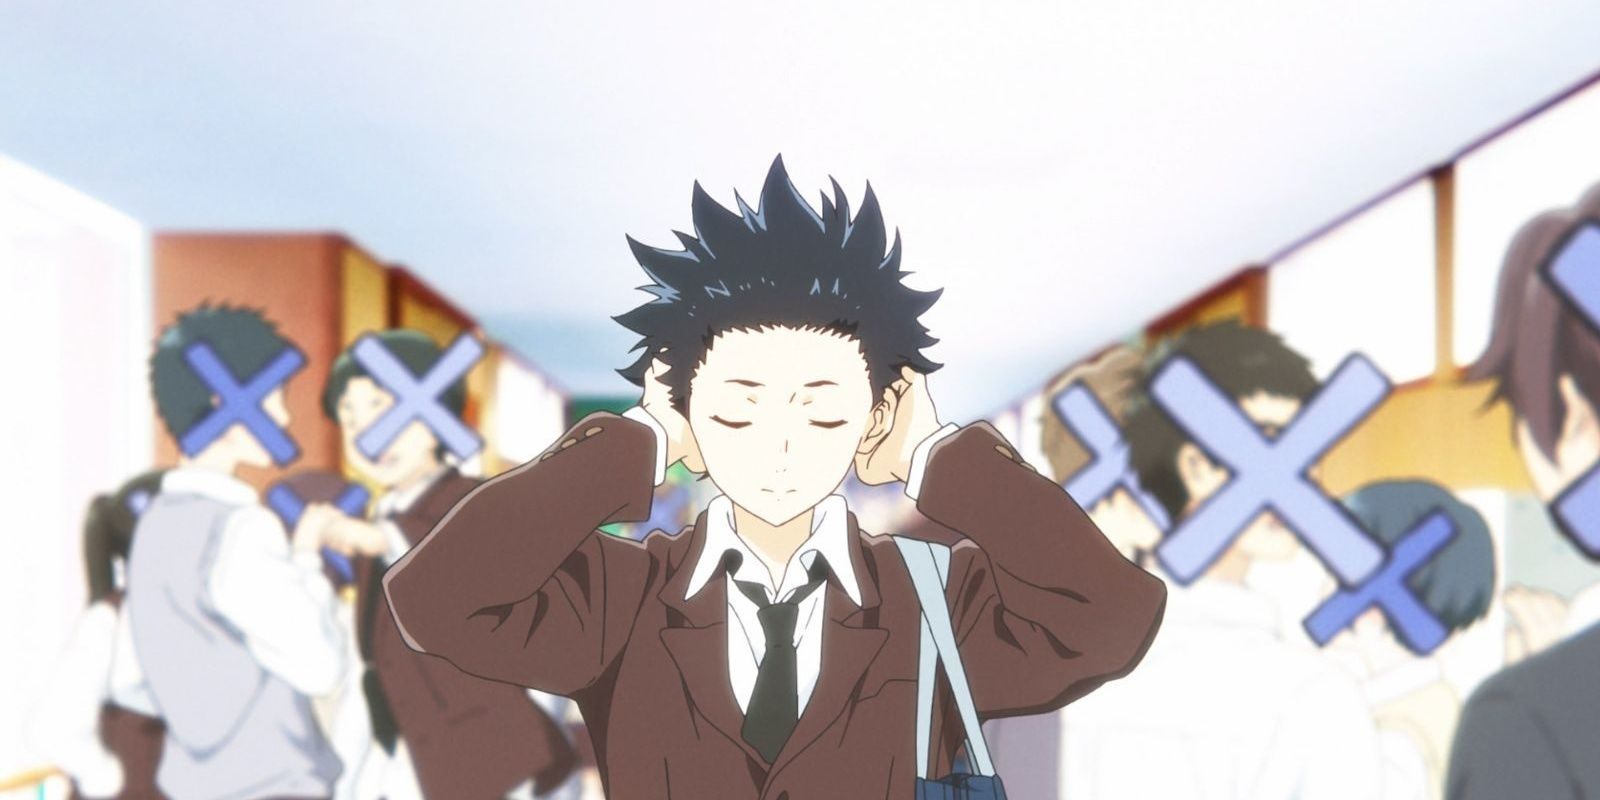 A boy puts his hands over his ears in A Silent Voice 